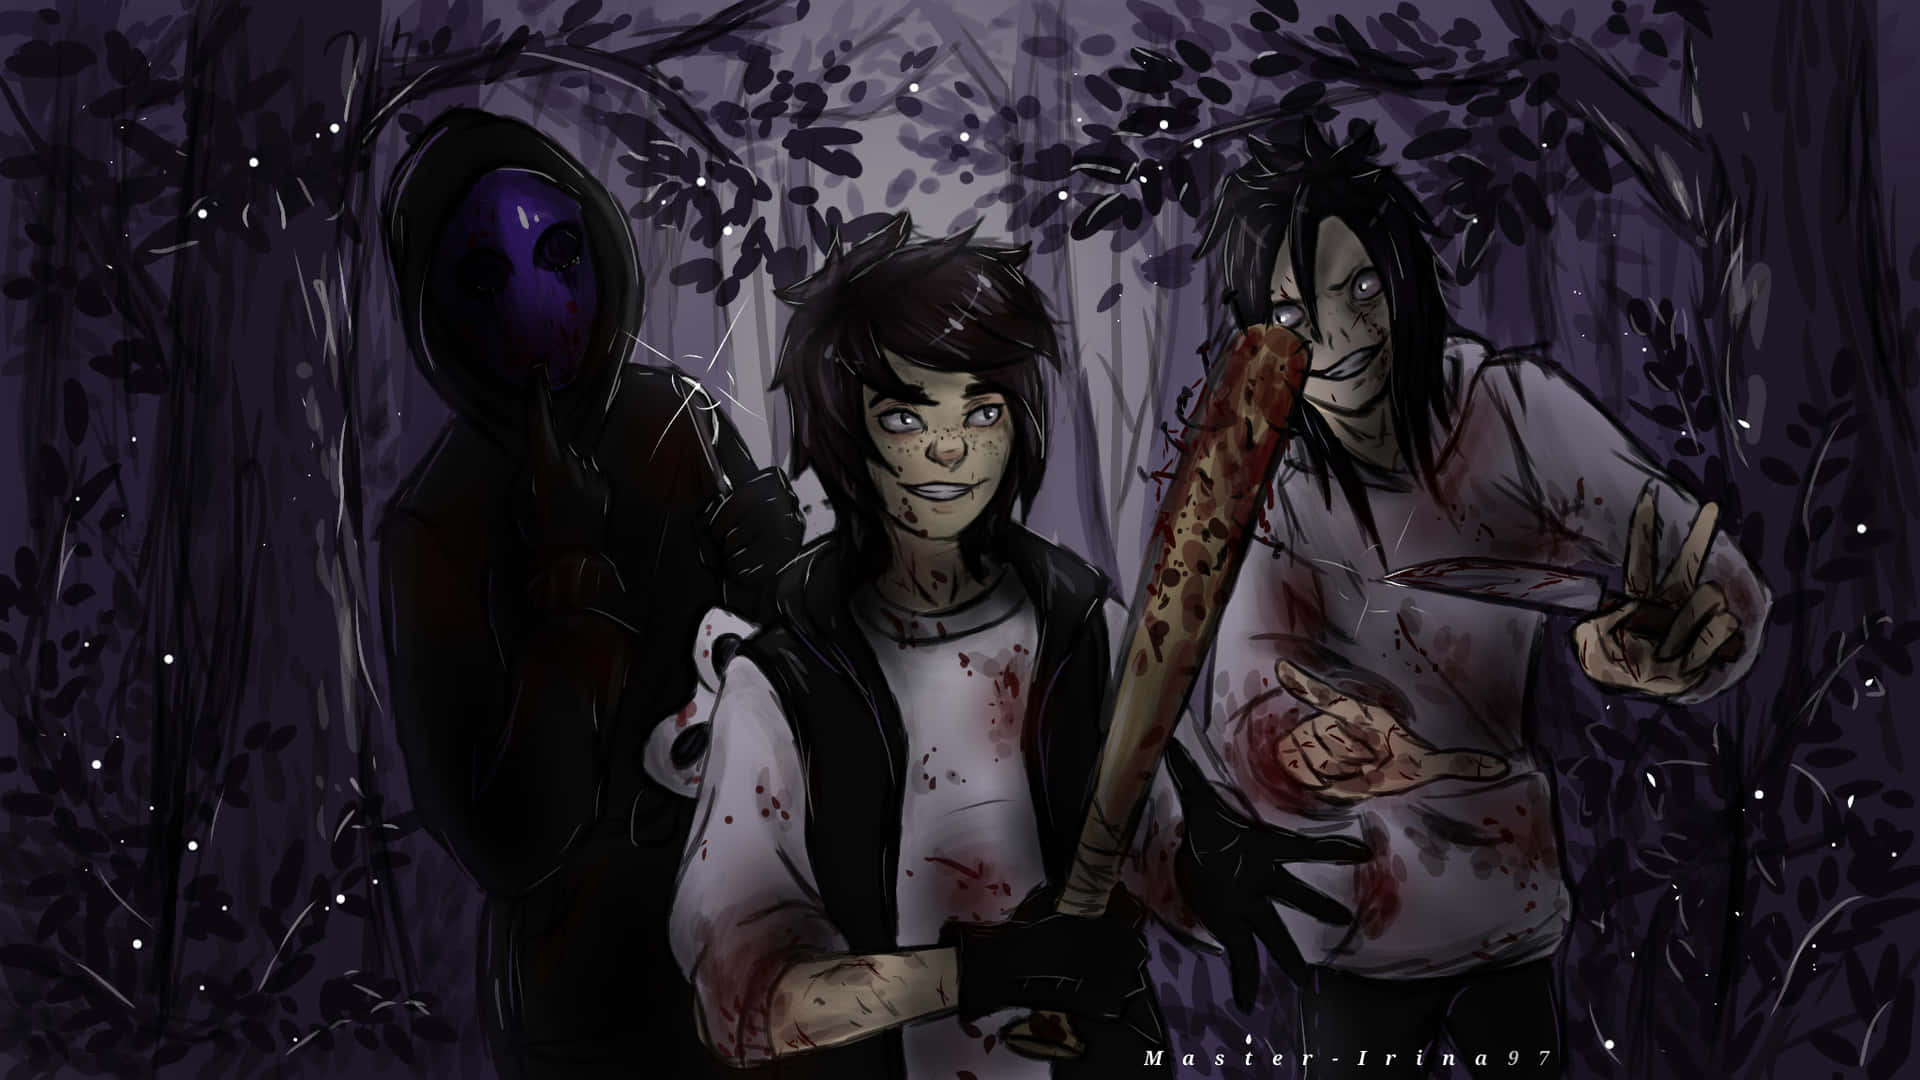 “Jeff The Killer Stalking in the Shadows”